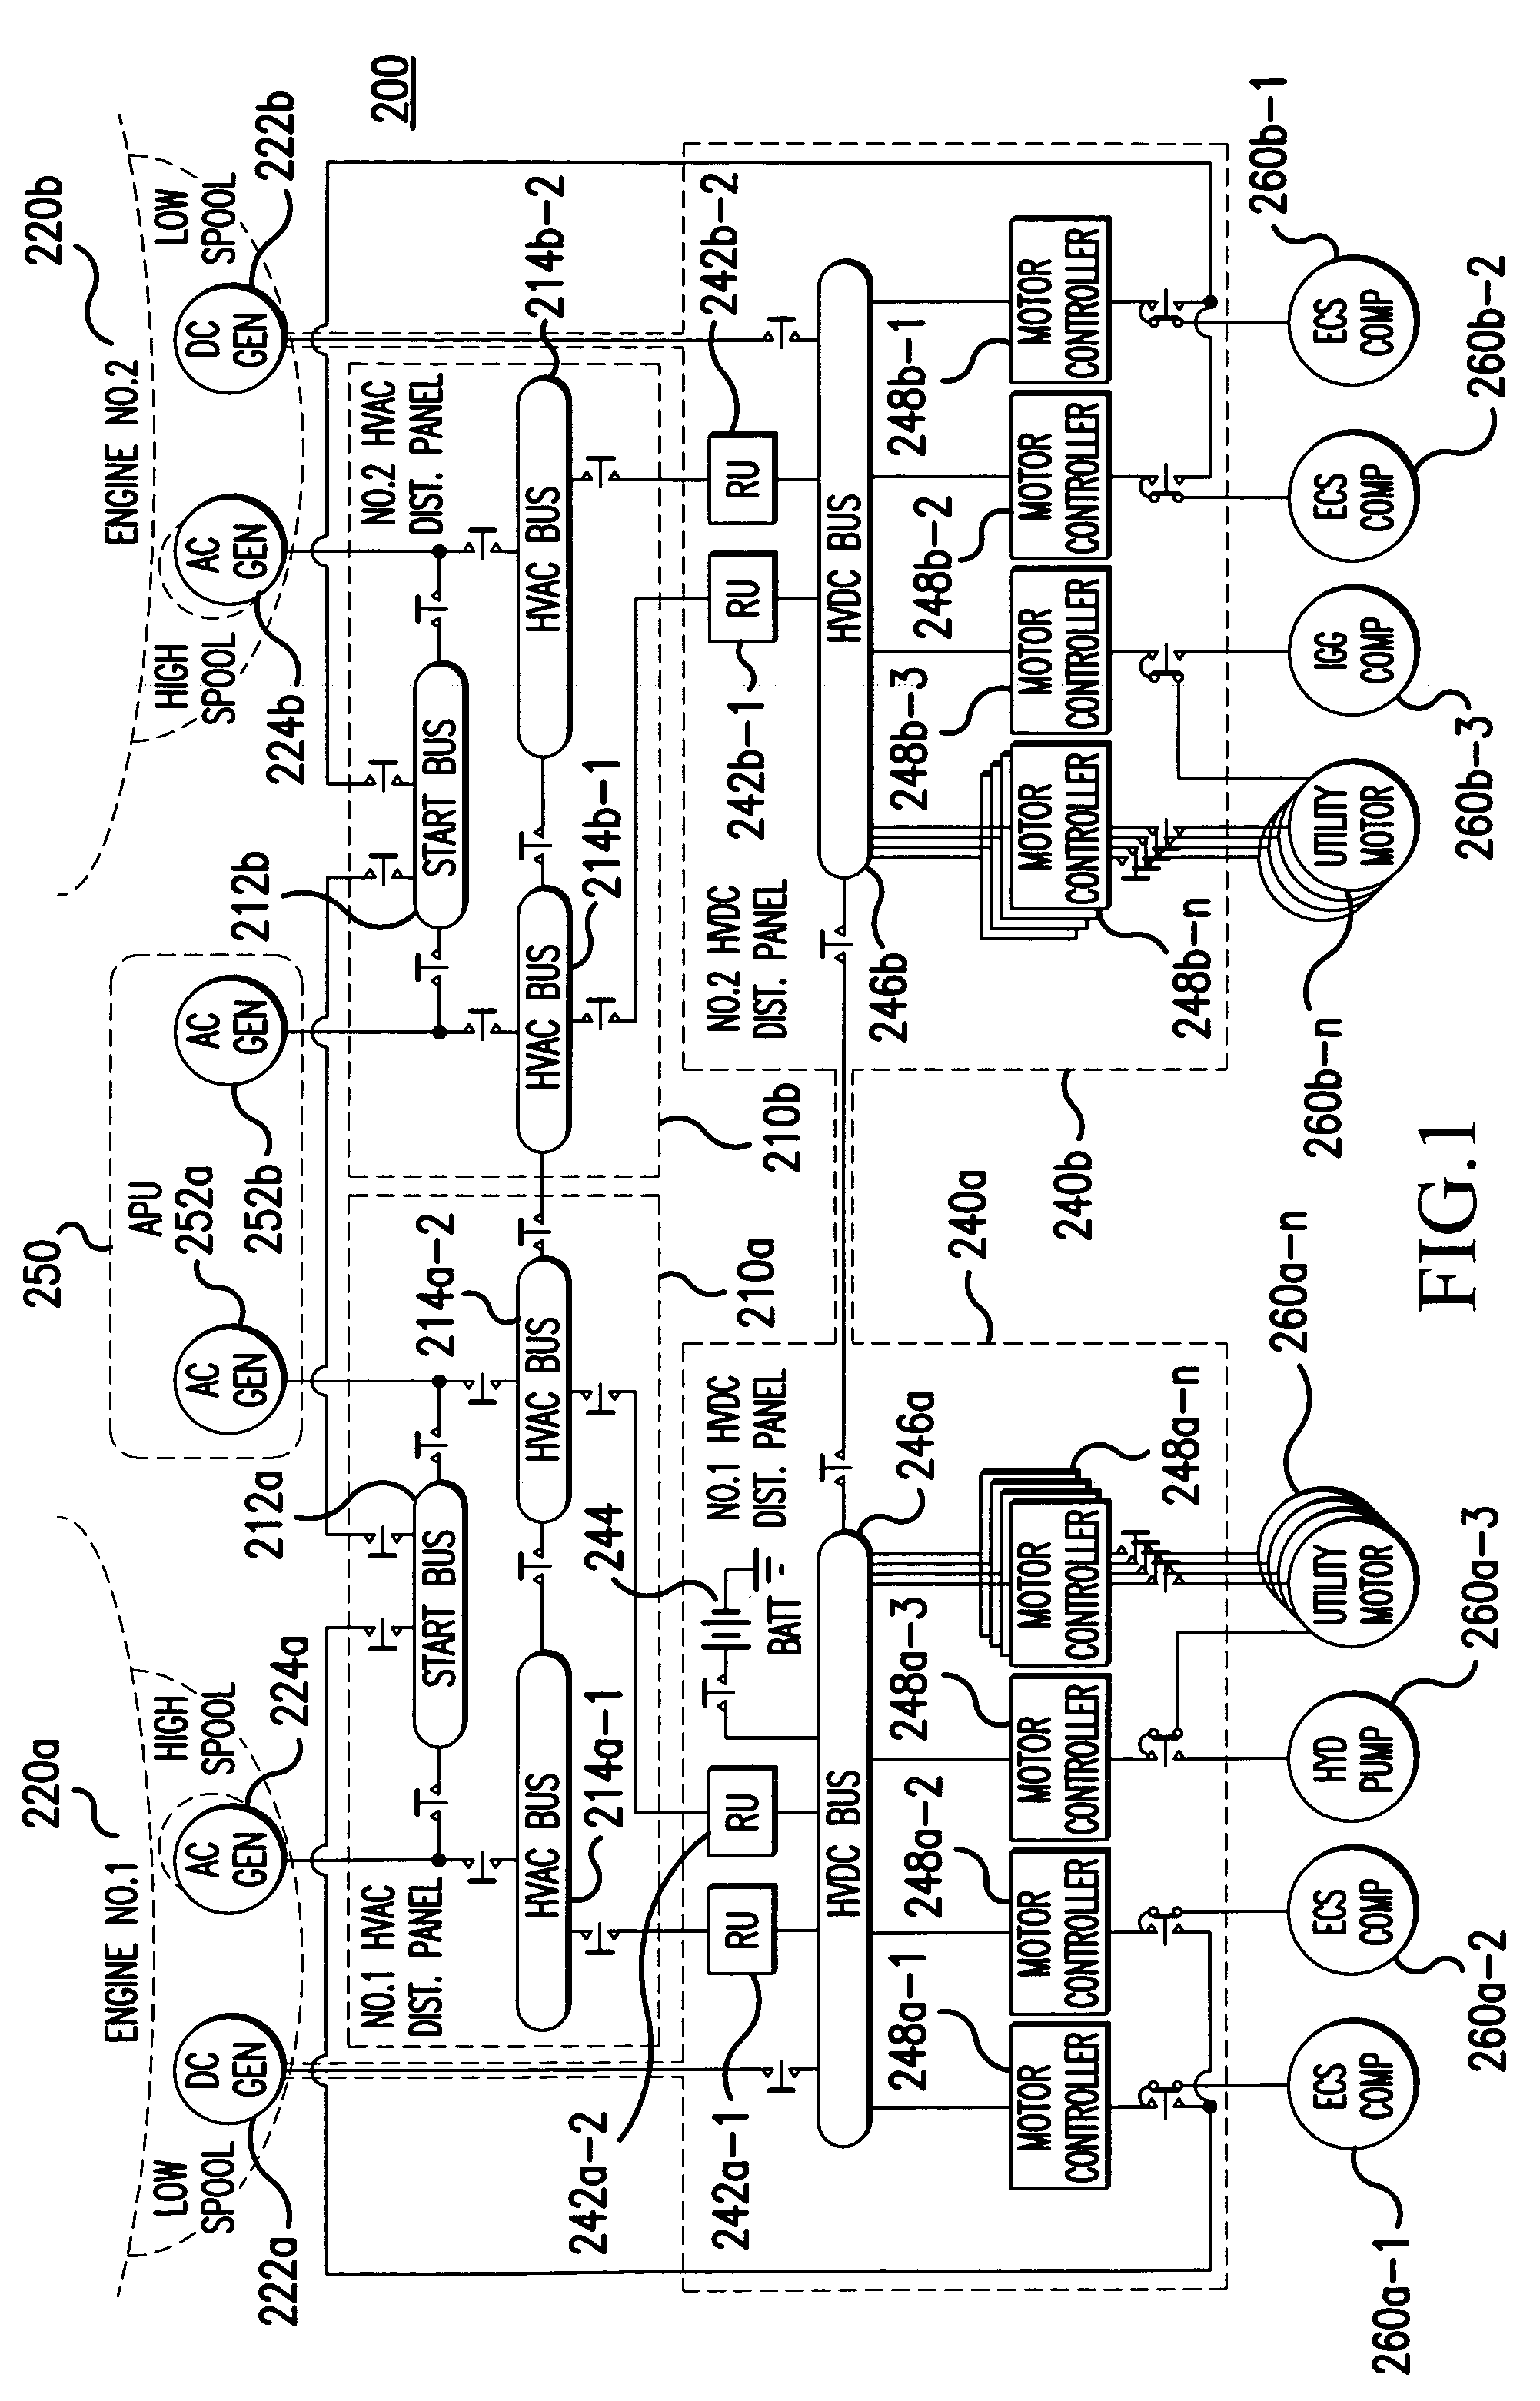 Electrical starting, generation, conversion and distribution system architecture for a more electric vehicle